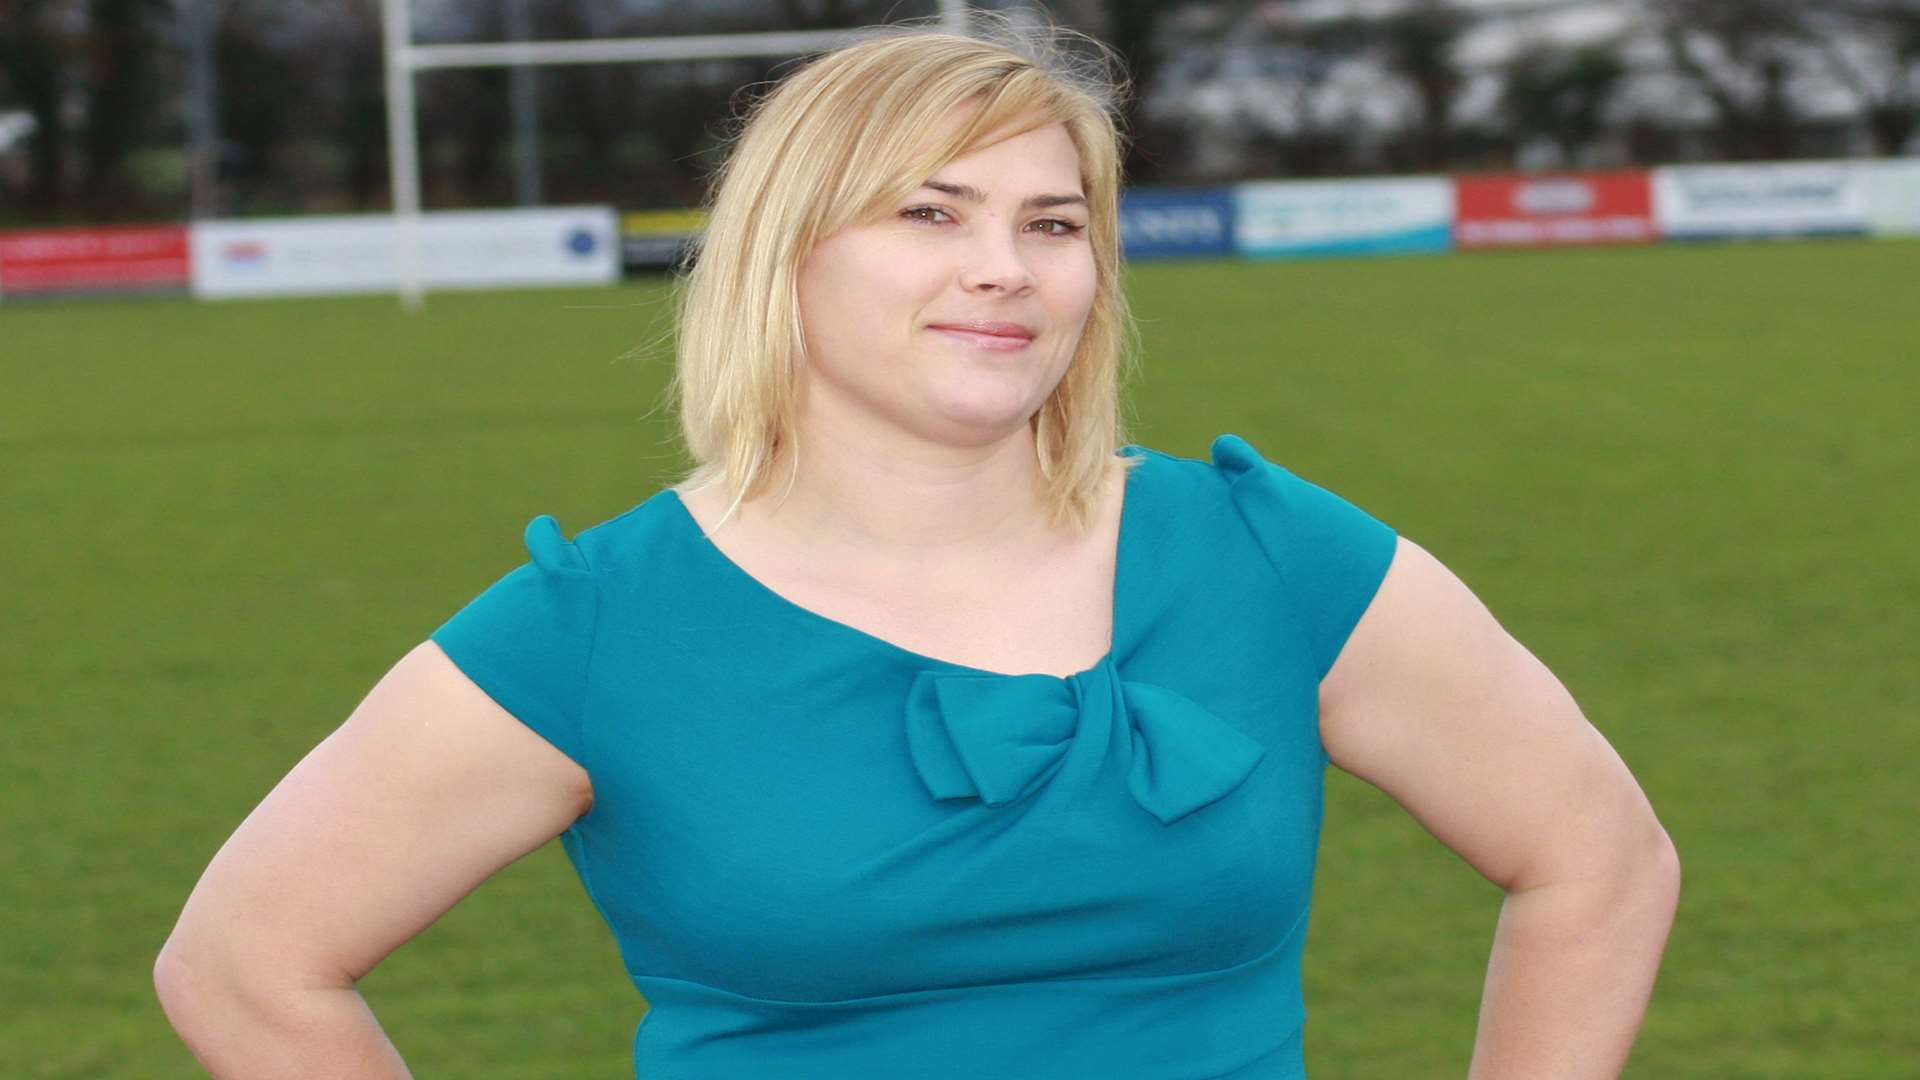 Former England Ladies Rugby captain Catherine Spencer, who founded Inspiring Women